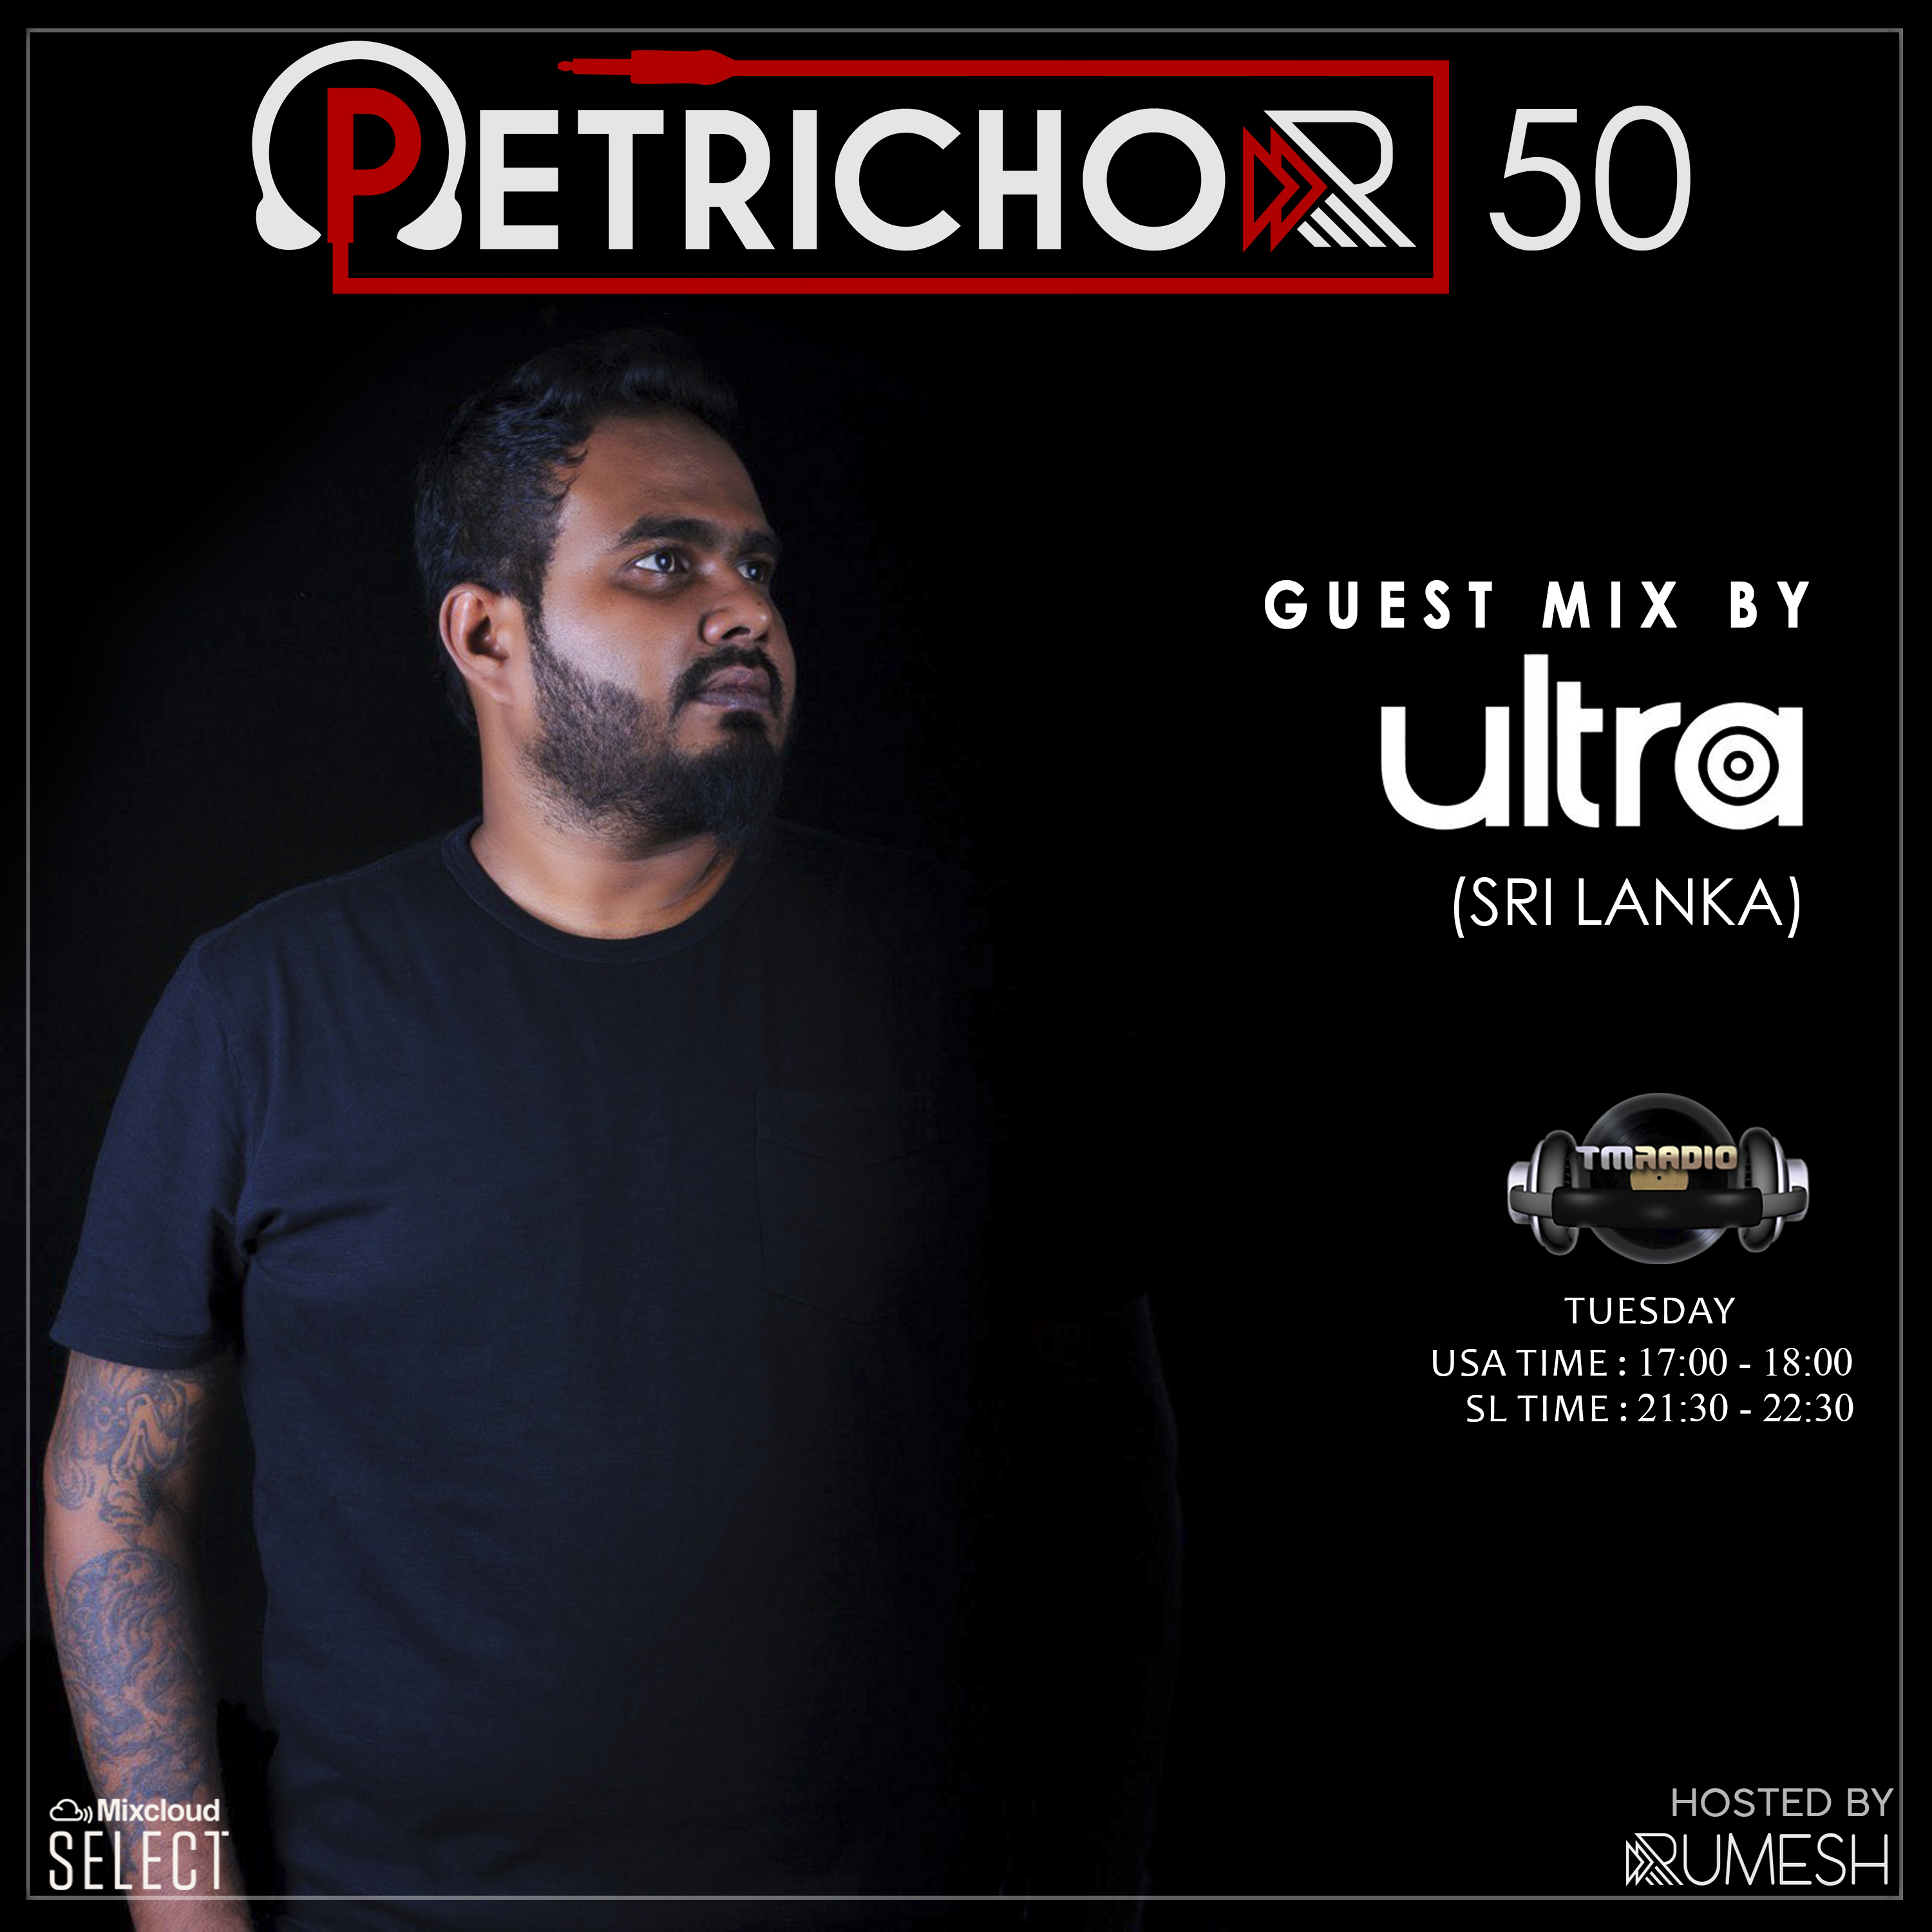 Petrichor :: Petrichor 50 guest mix by Ultra (Sri Lanka) (aired on October 22nd, 2019) banner logo